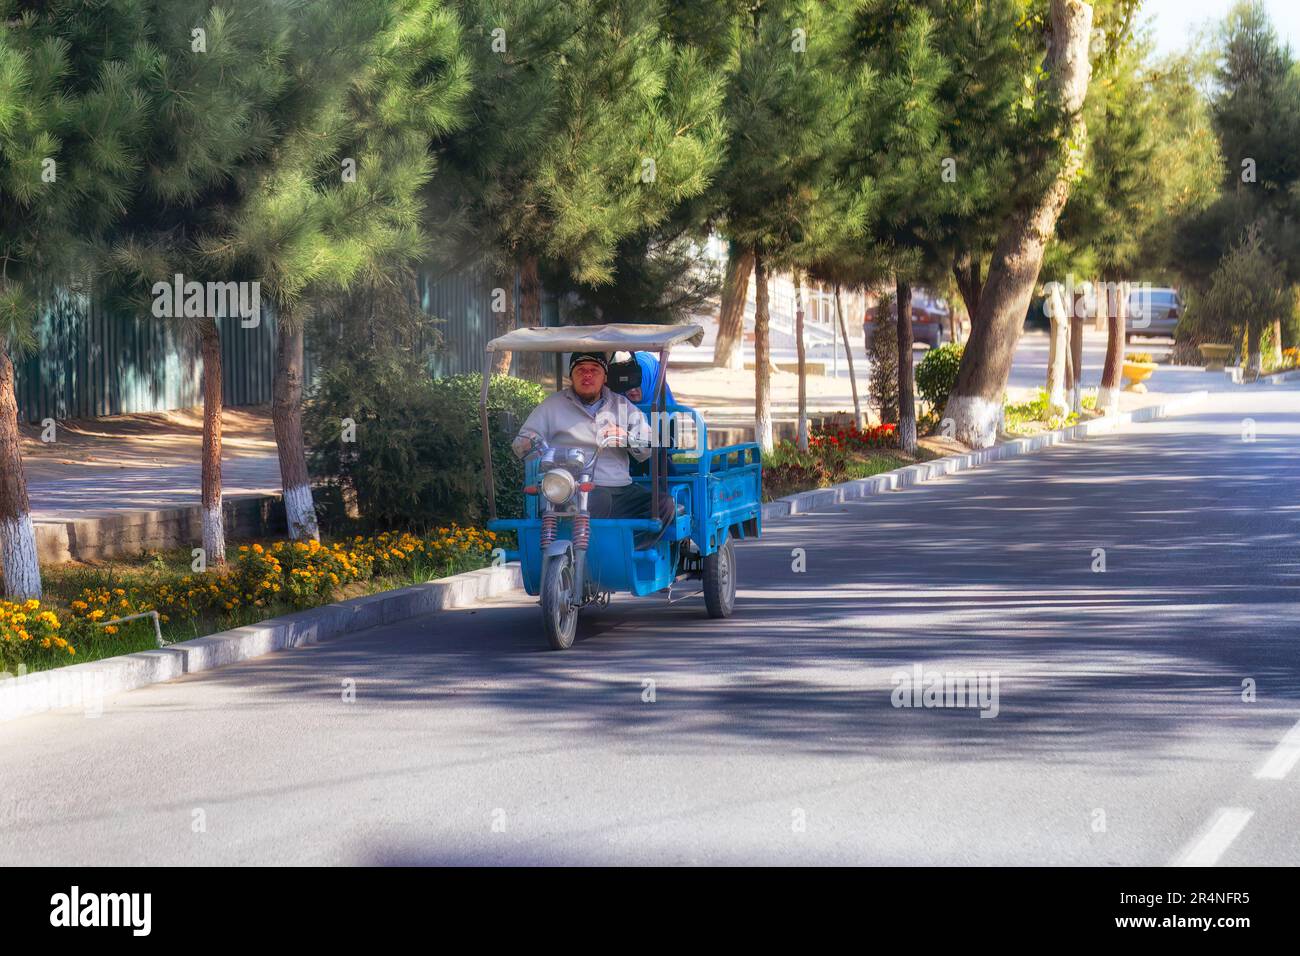 Tajikistan road. October 17, 2019: Young man ride on an old motorcycle with a back cart. Stock Photo